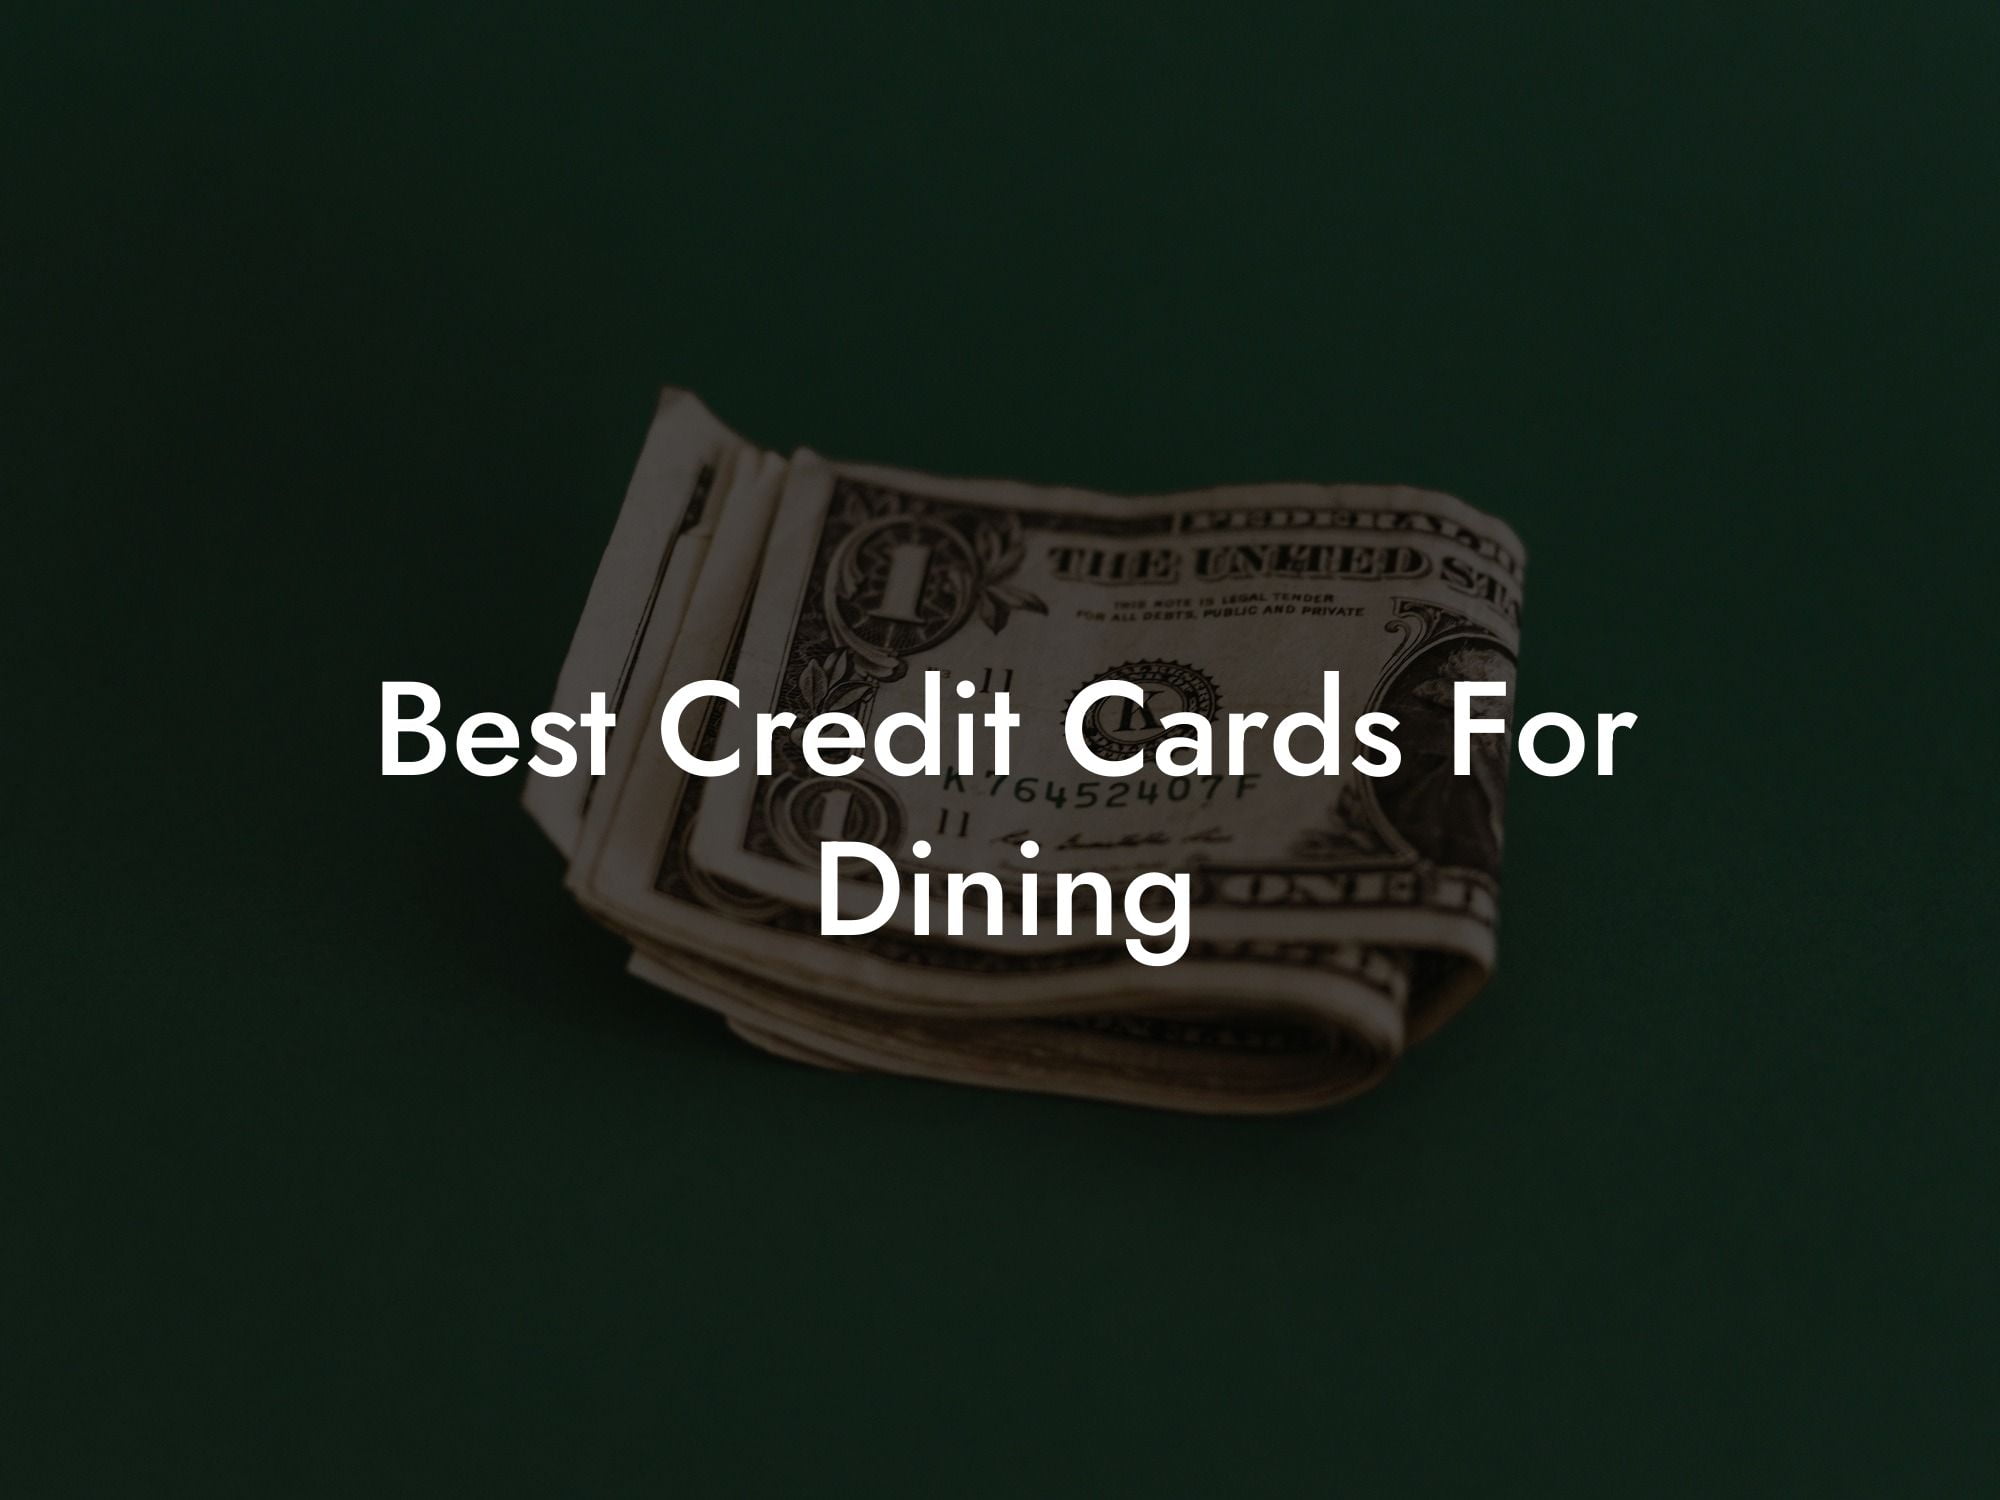 Best Credit Cards For Dining